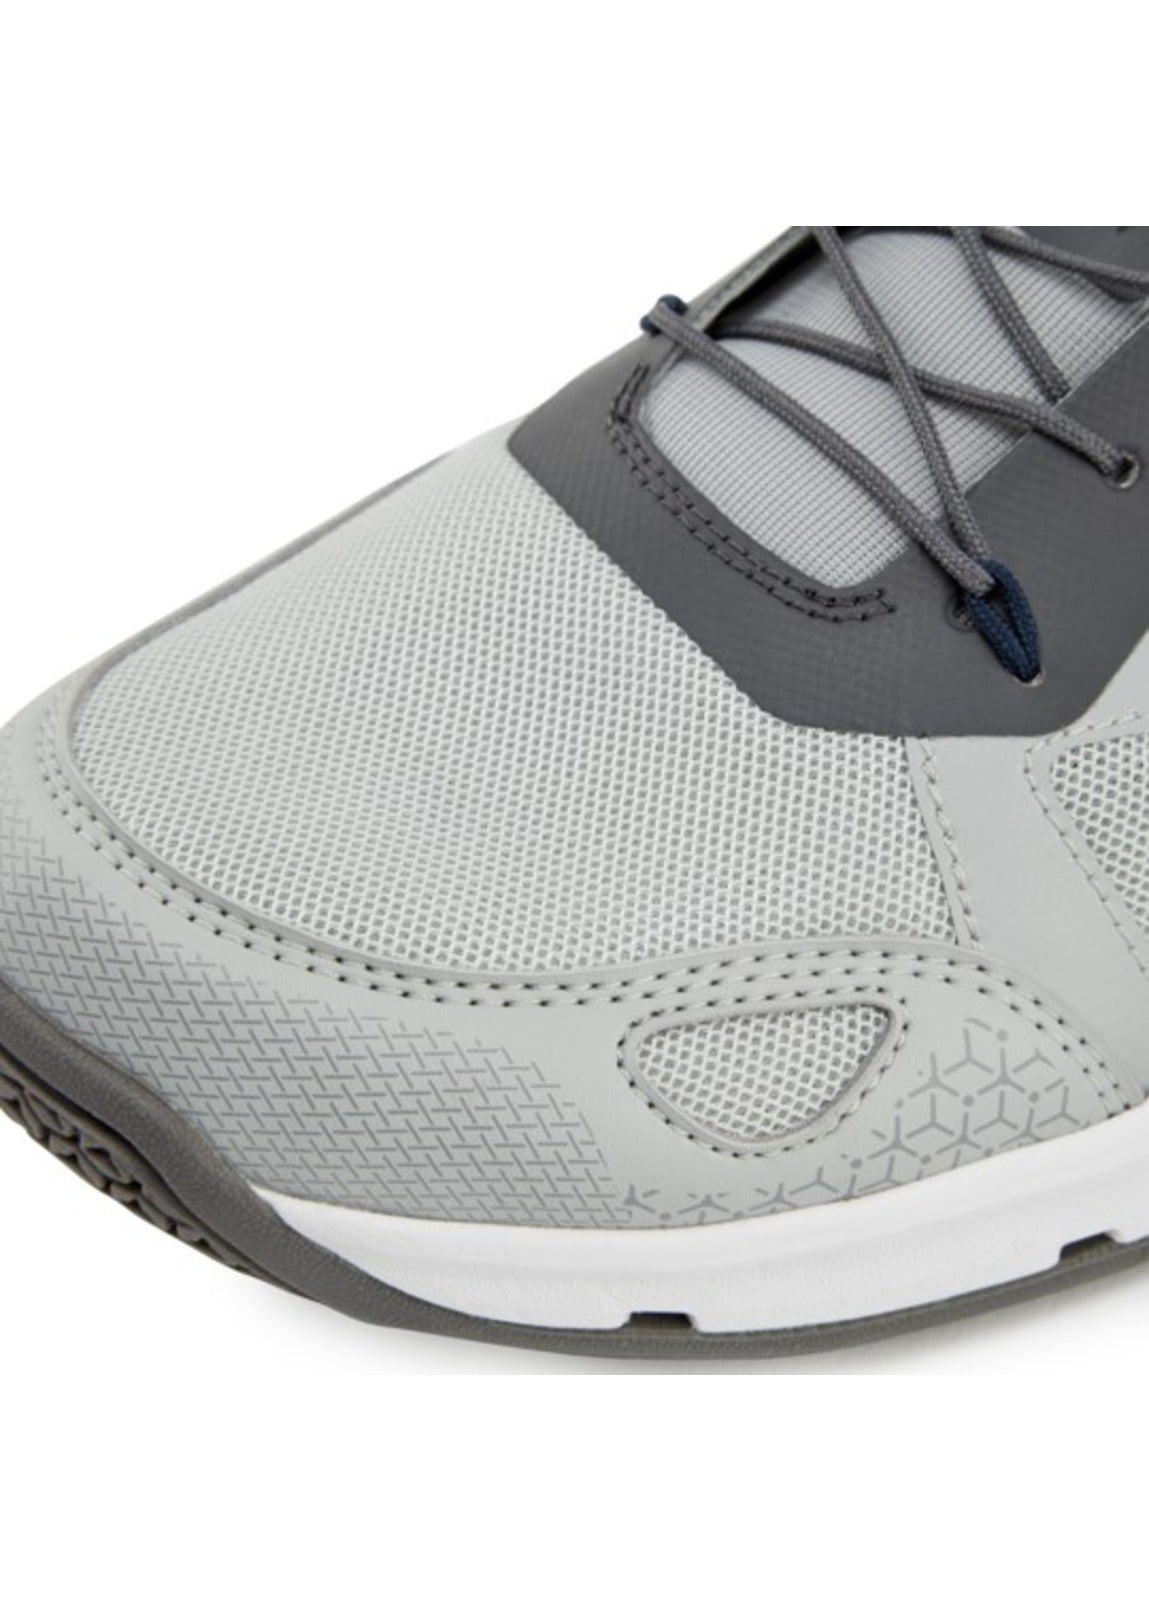 Gill Race Trainer - Grey